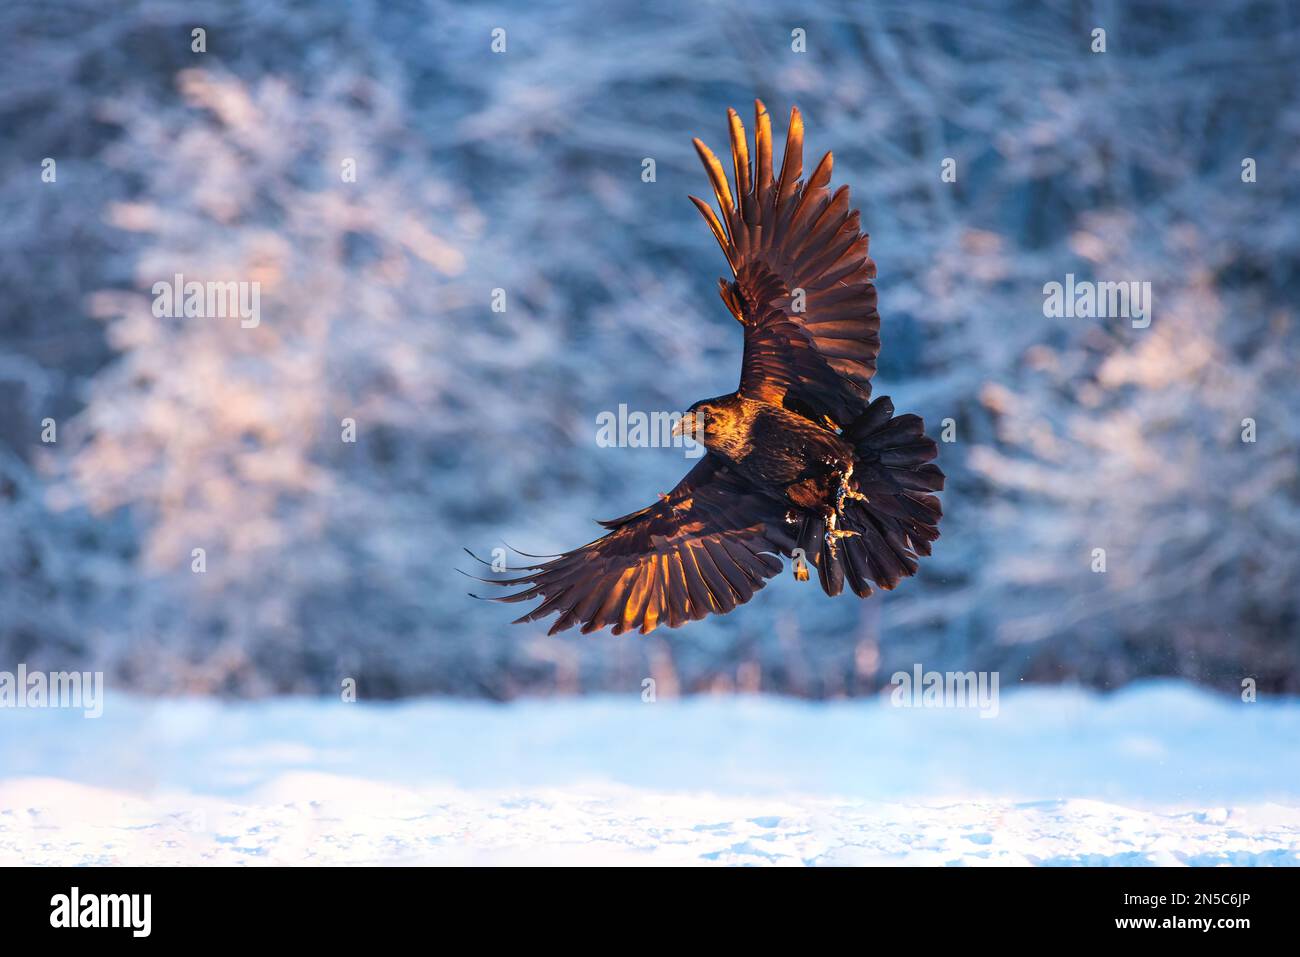 Flying black raven bird (Corvus corax) with open wings and snow flakes bokeh, wildlife in nature Stock Photo